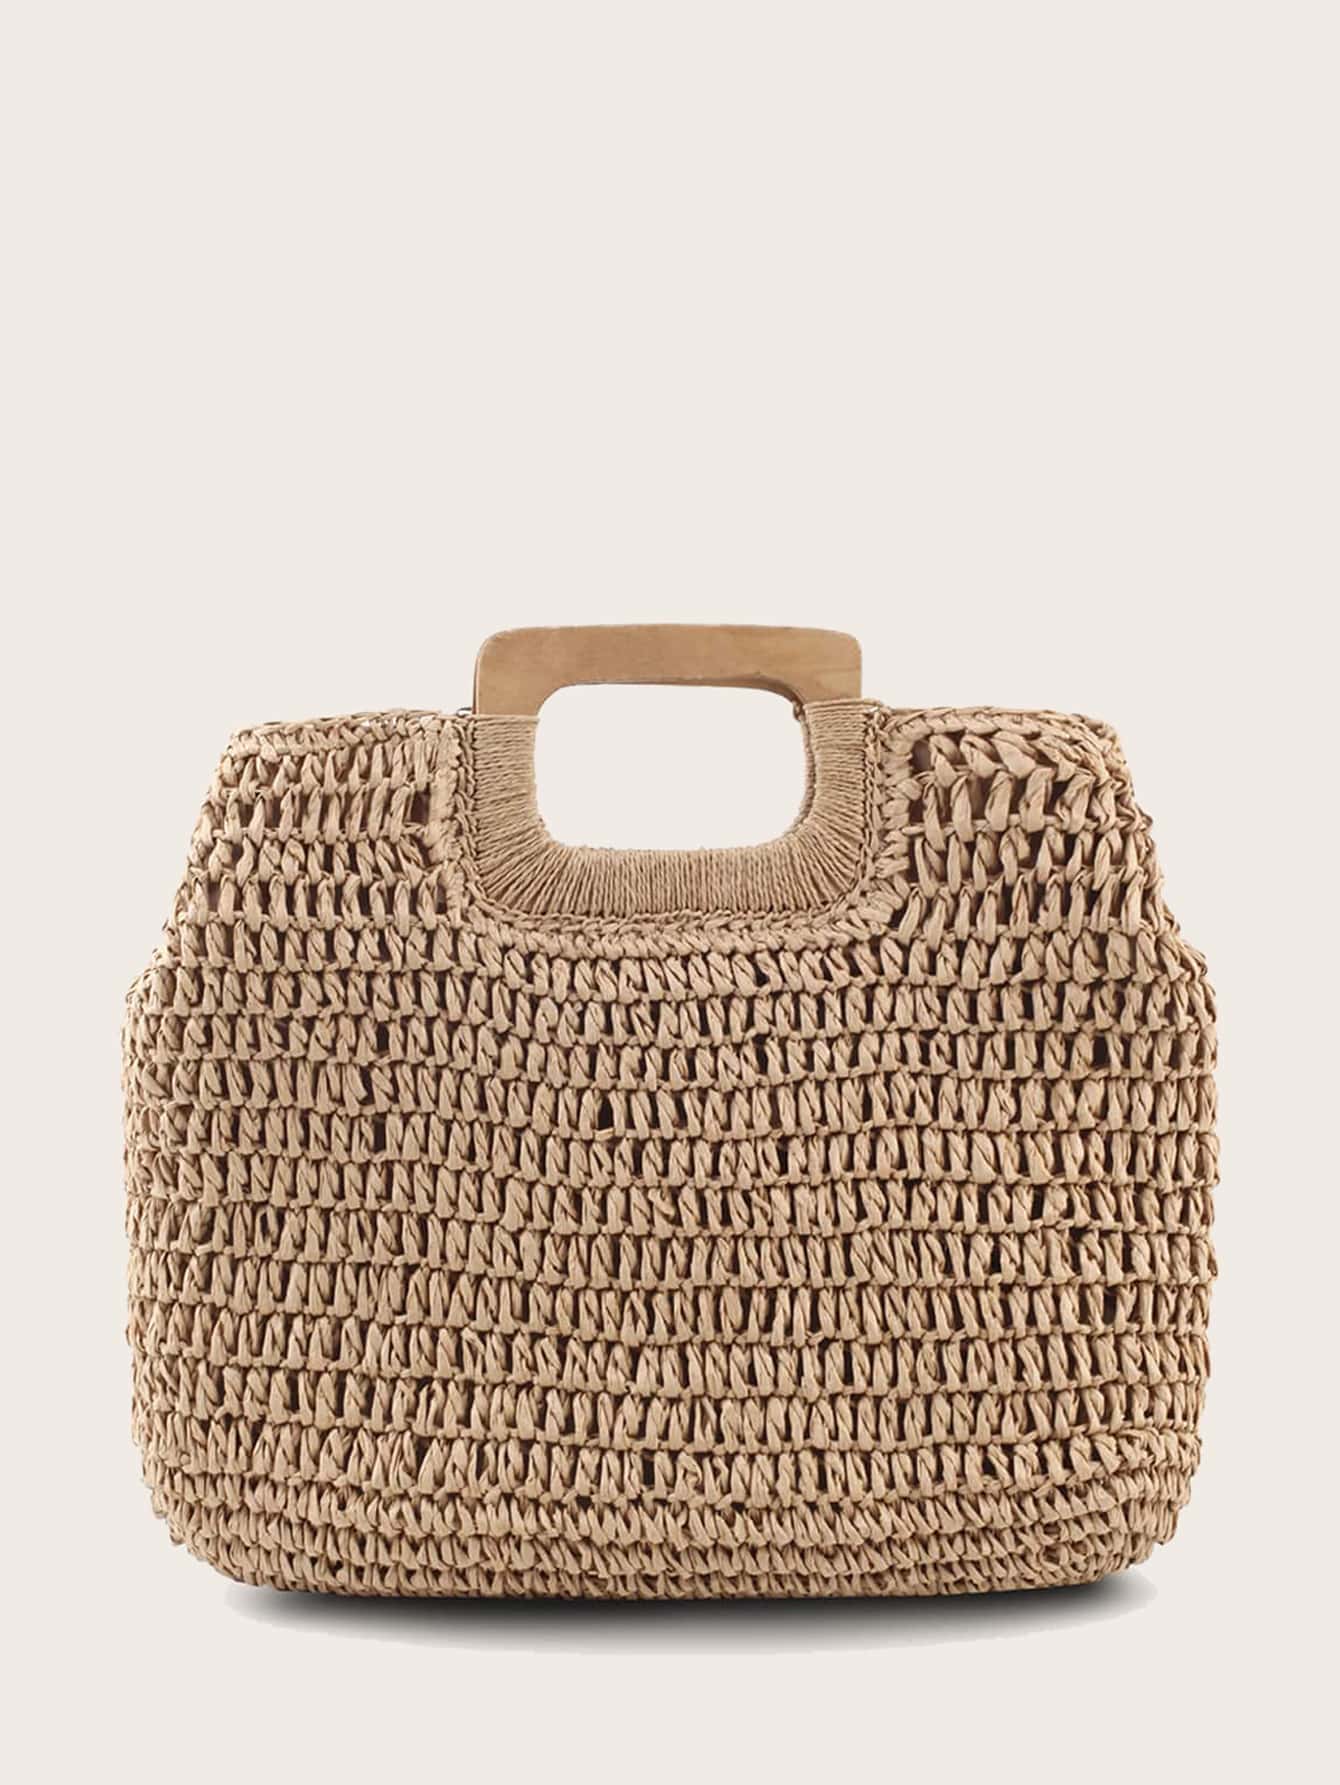 Braided Tote Bag With Wooden Handle